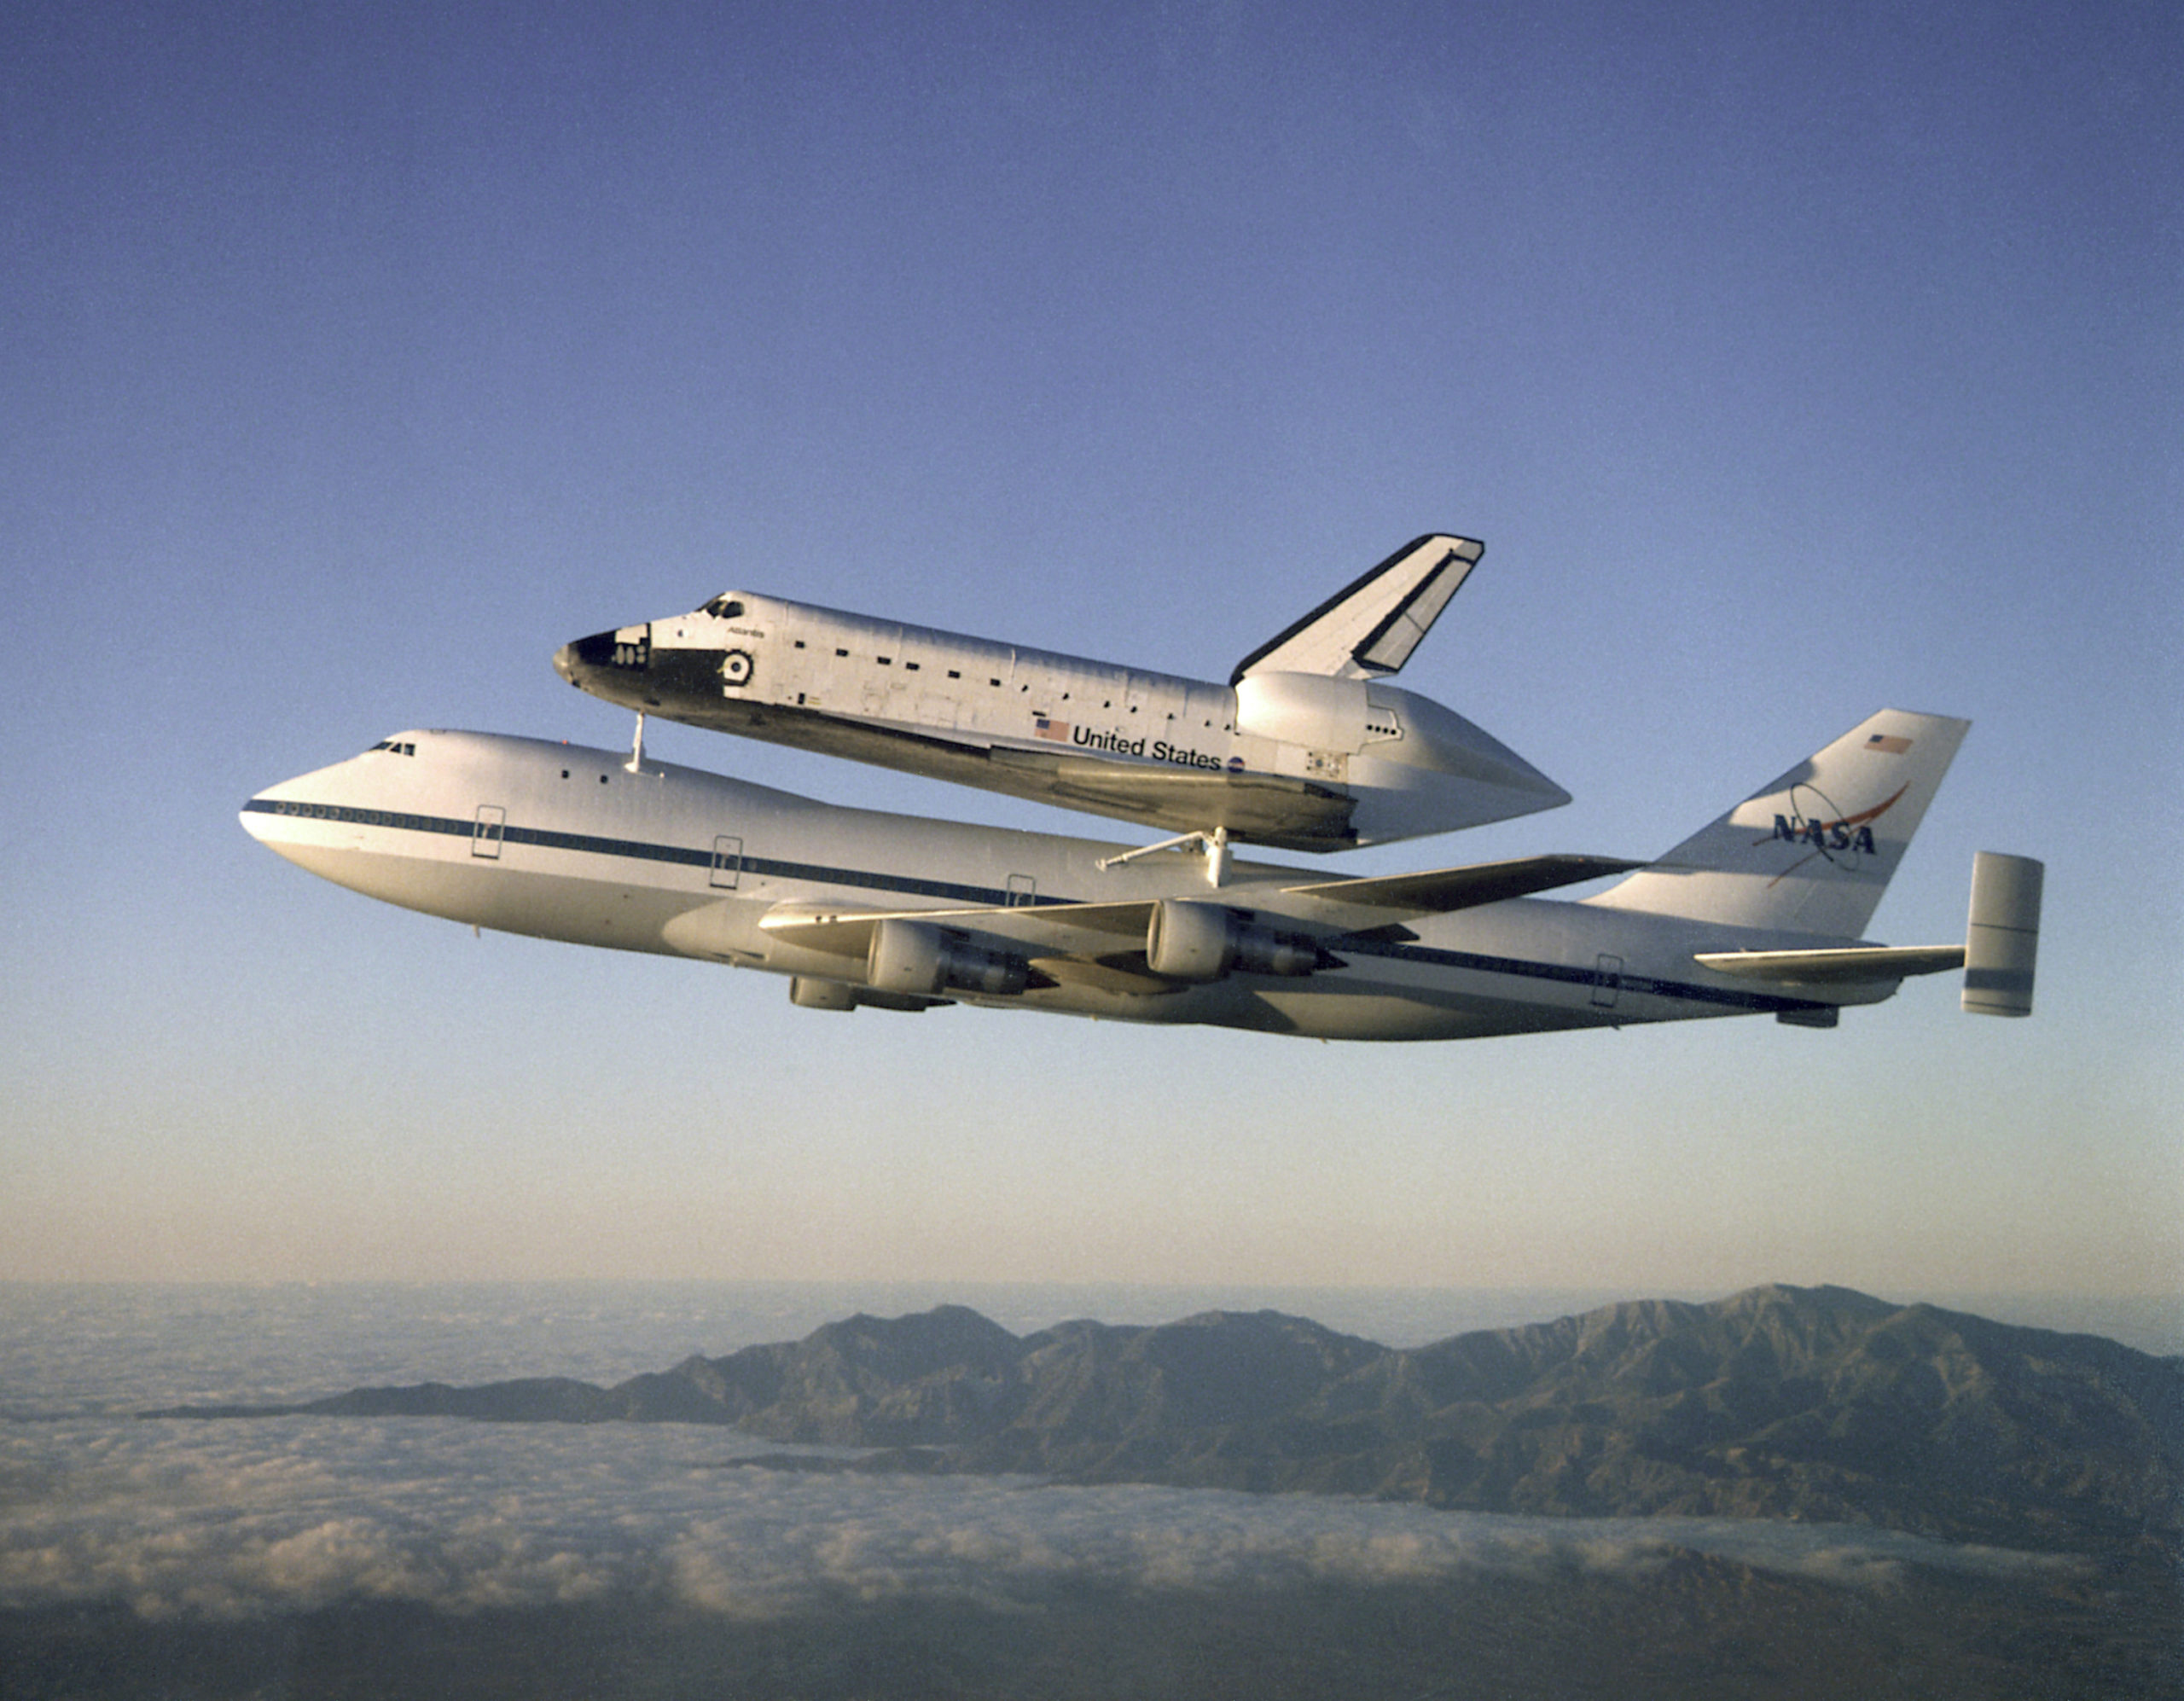 Goodbye, Space Shuttle Carrier, And Thank You For Being Awesome